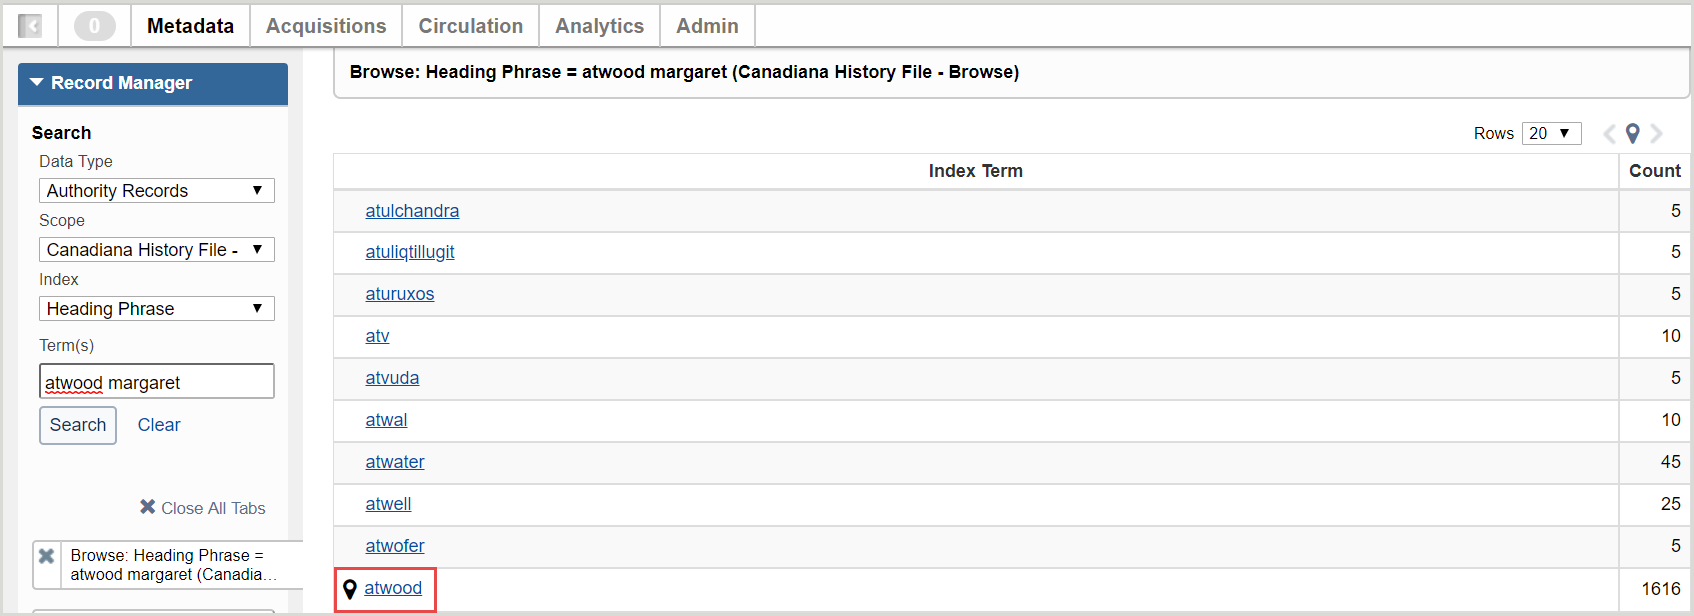 Canadiana History File - Browse results list